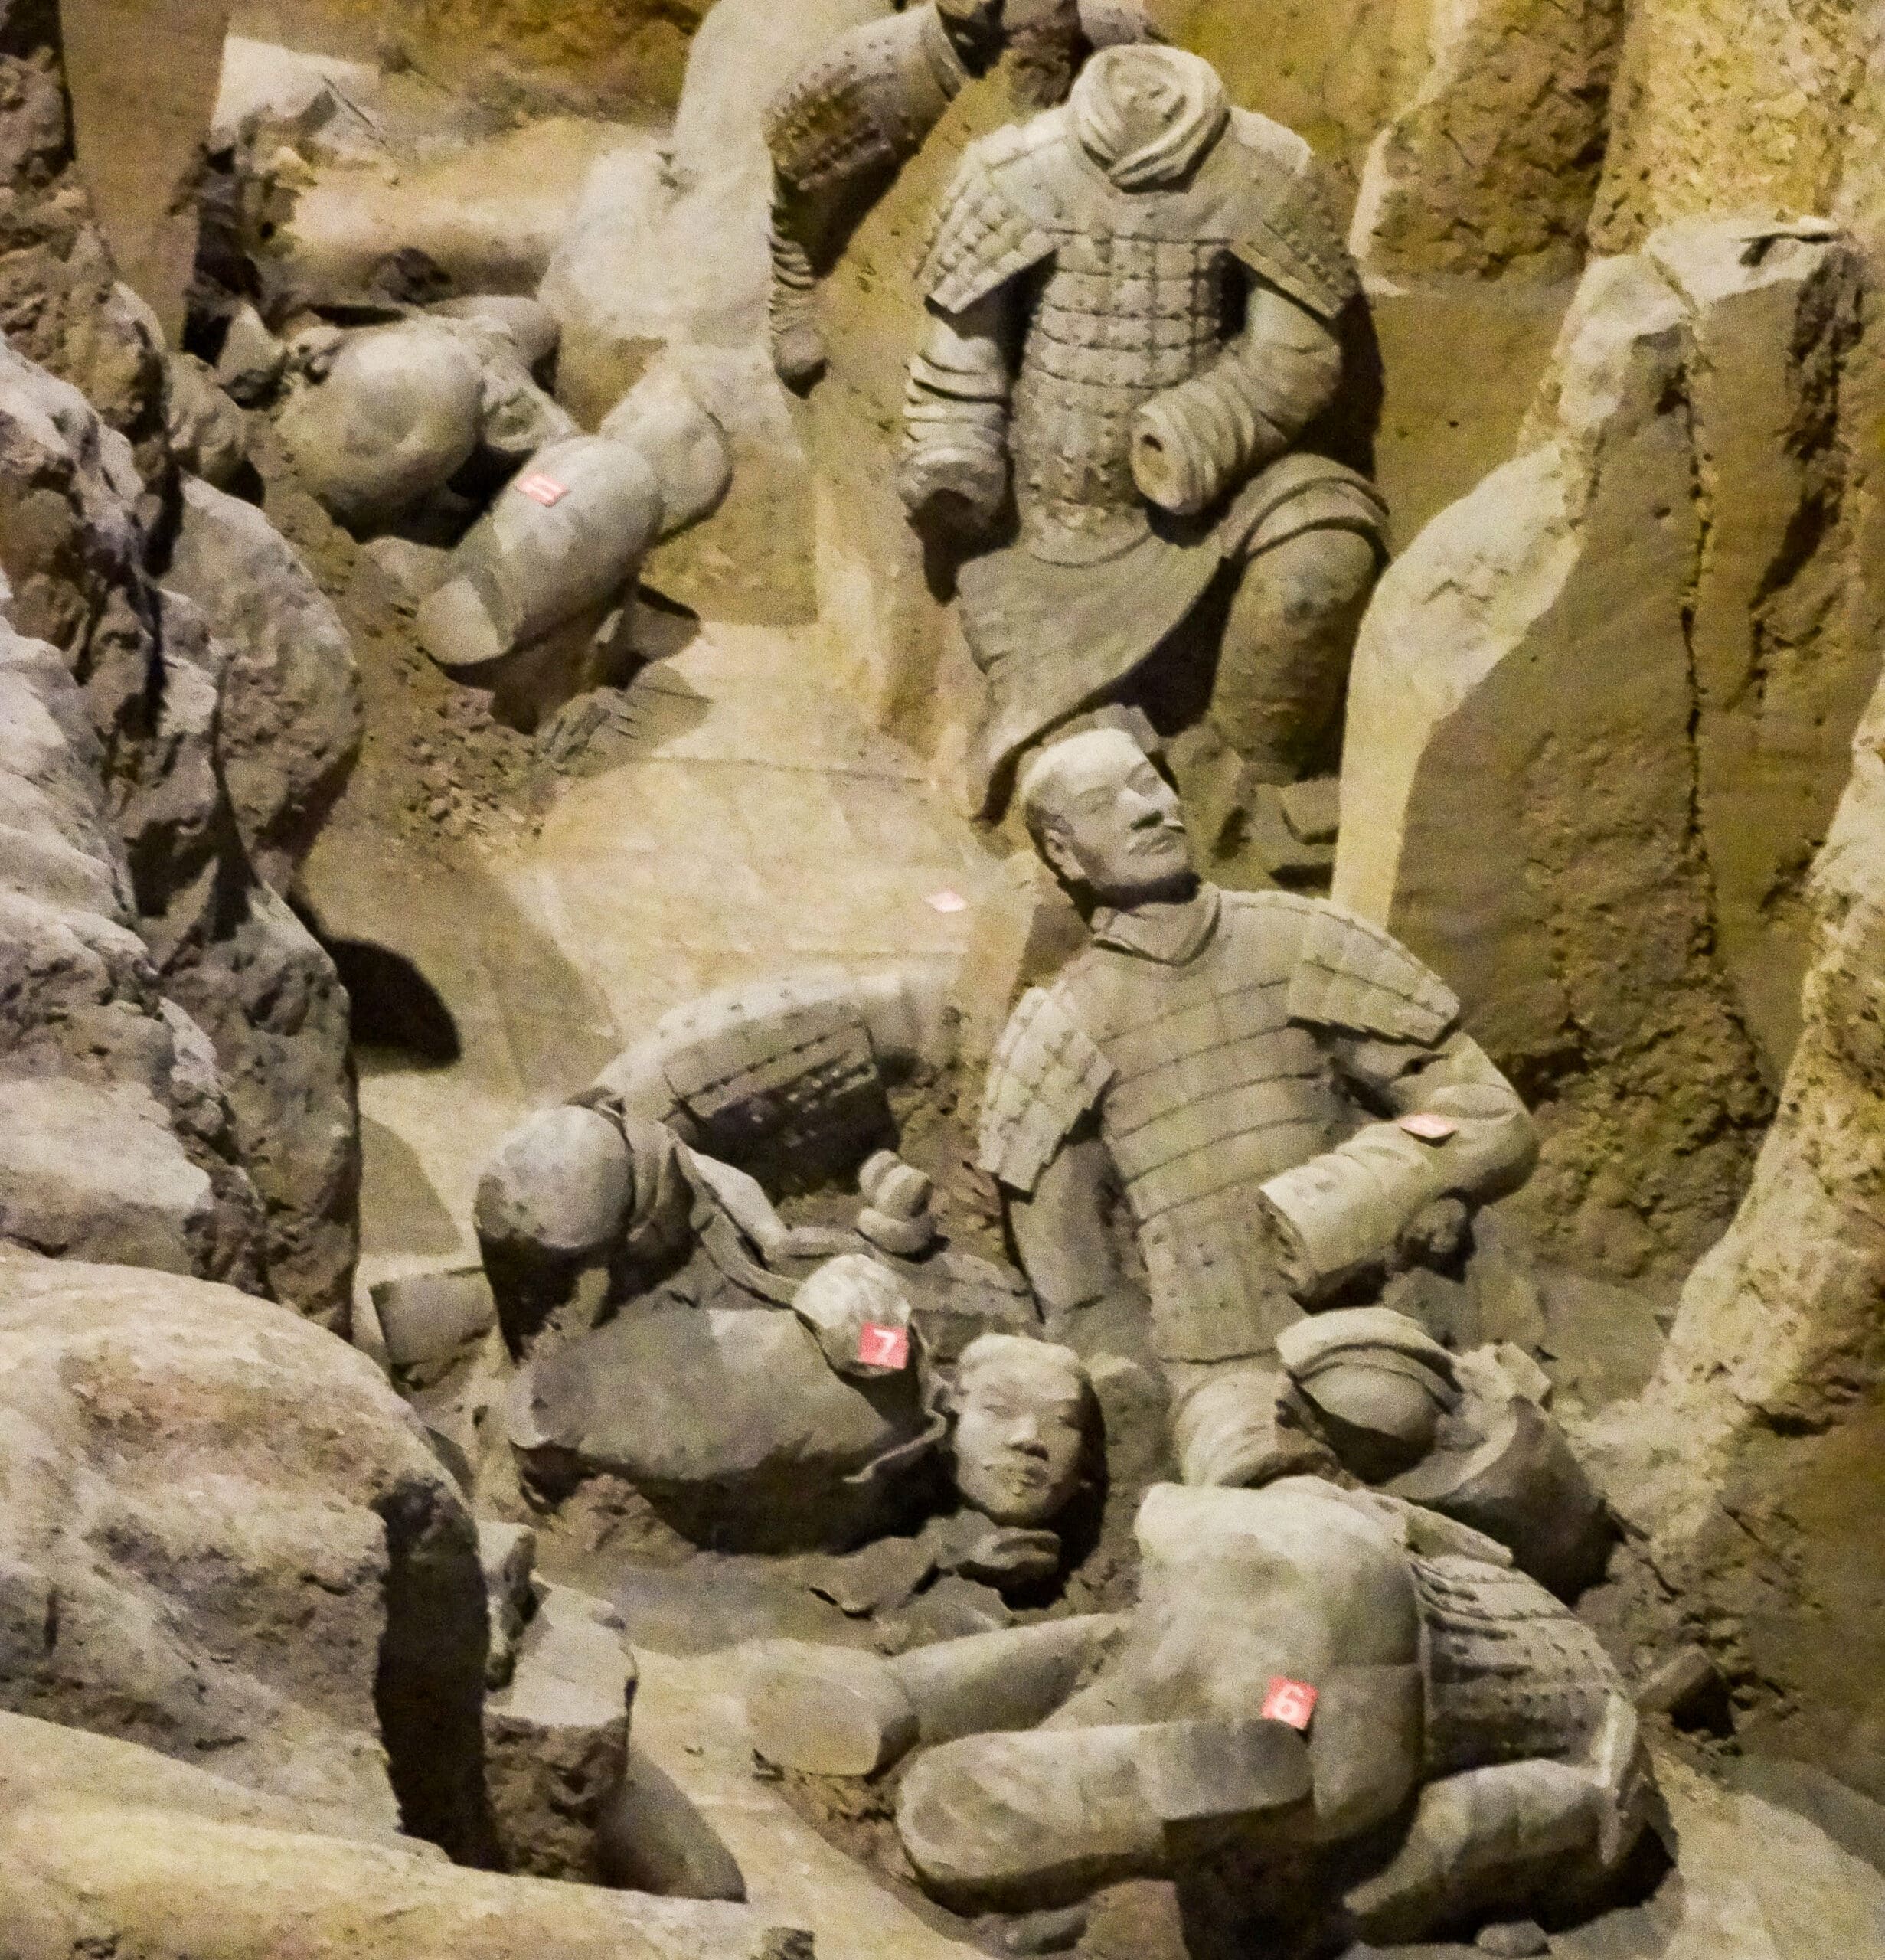 parts of the Terracotta Warriors of the Terracotta Army lie ruins in Pit 2 at Emperor Qinshihuang's Mausoleum, Xian, China